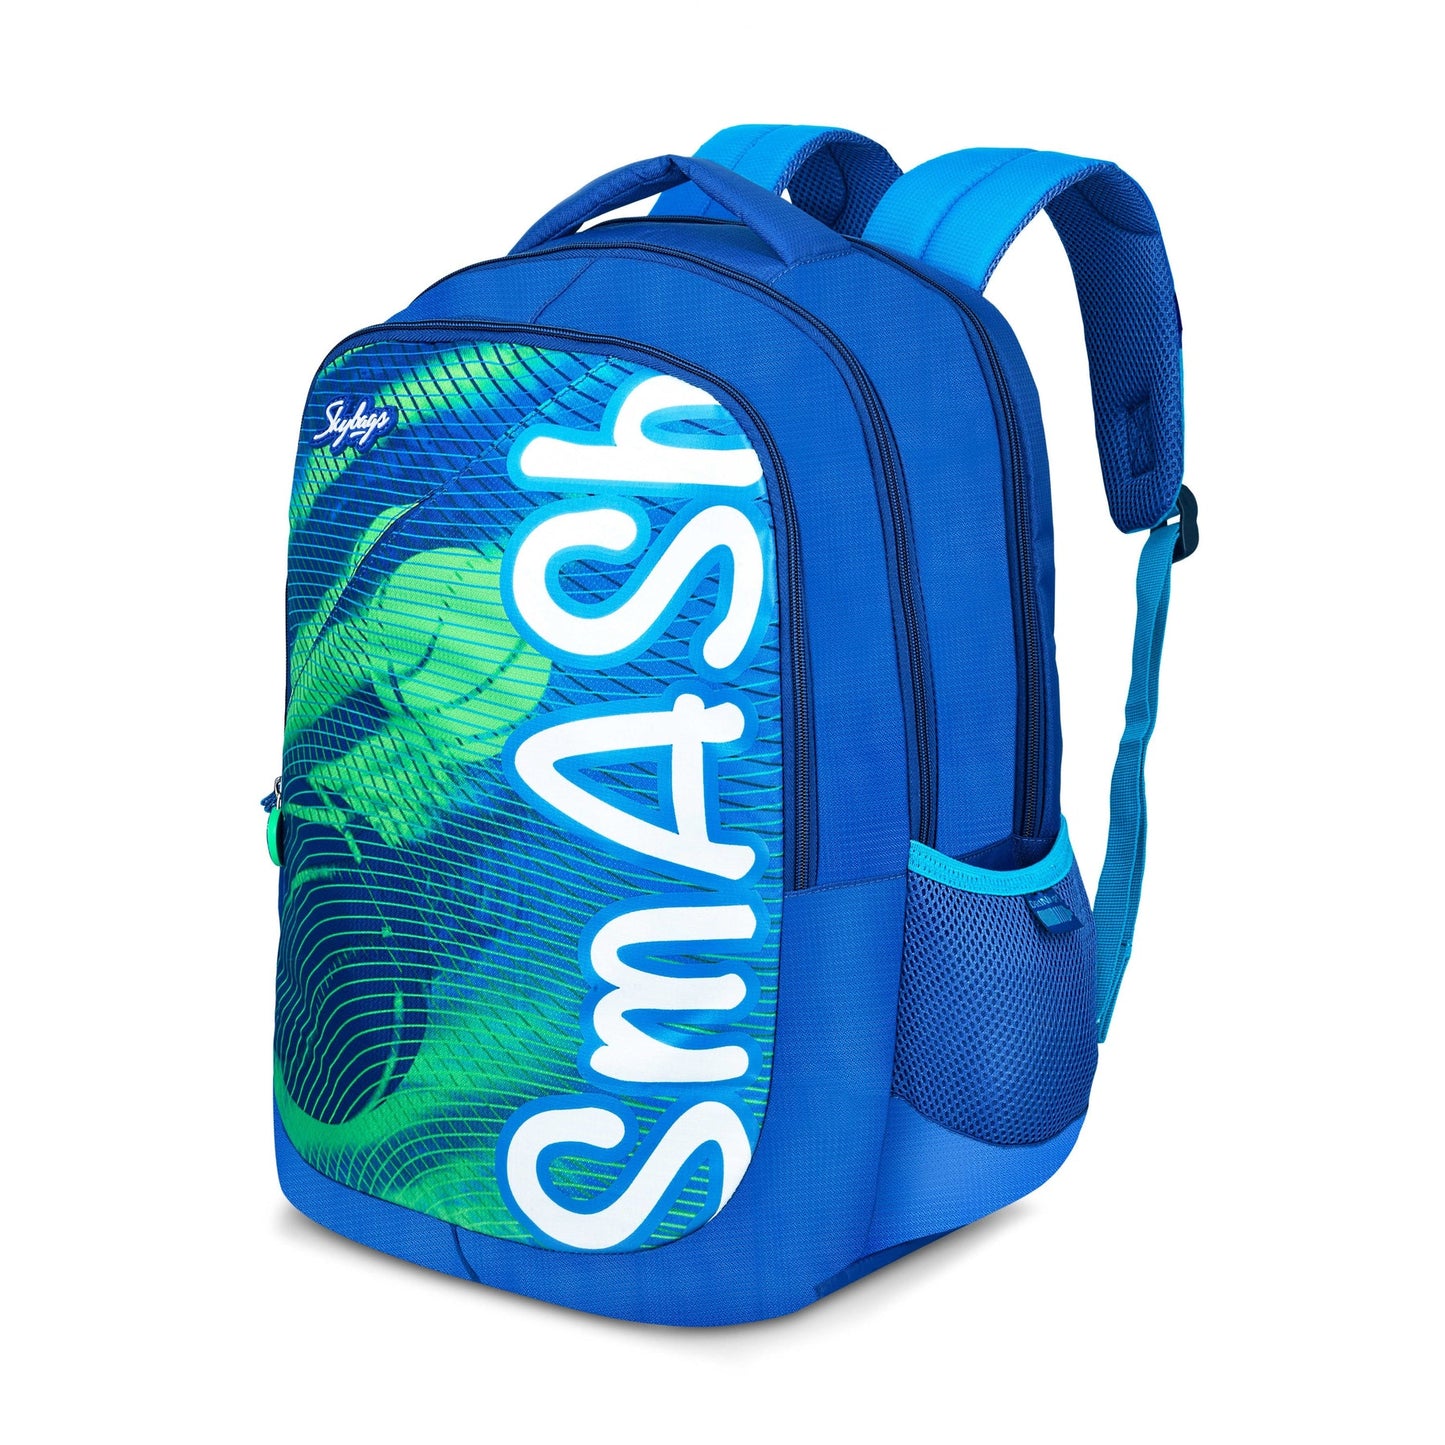 Skybags Squad 05 38L Backpack